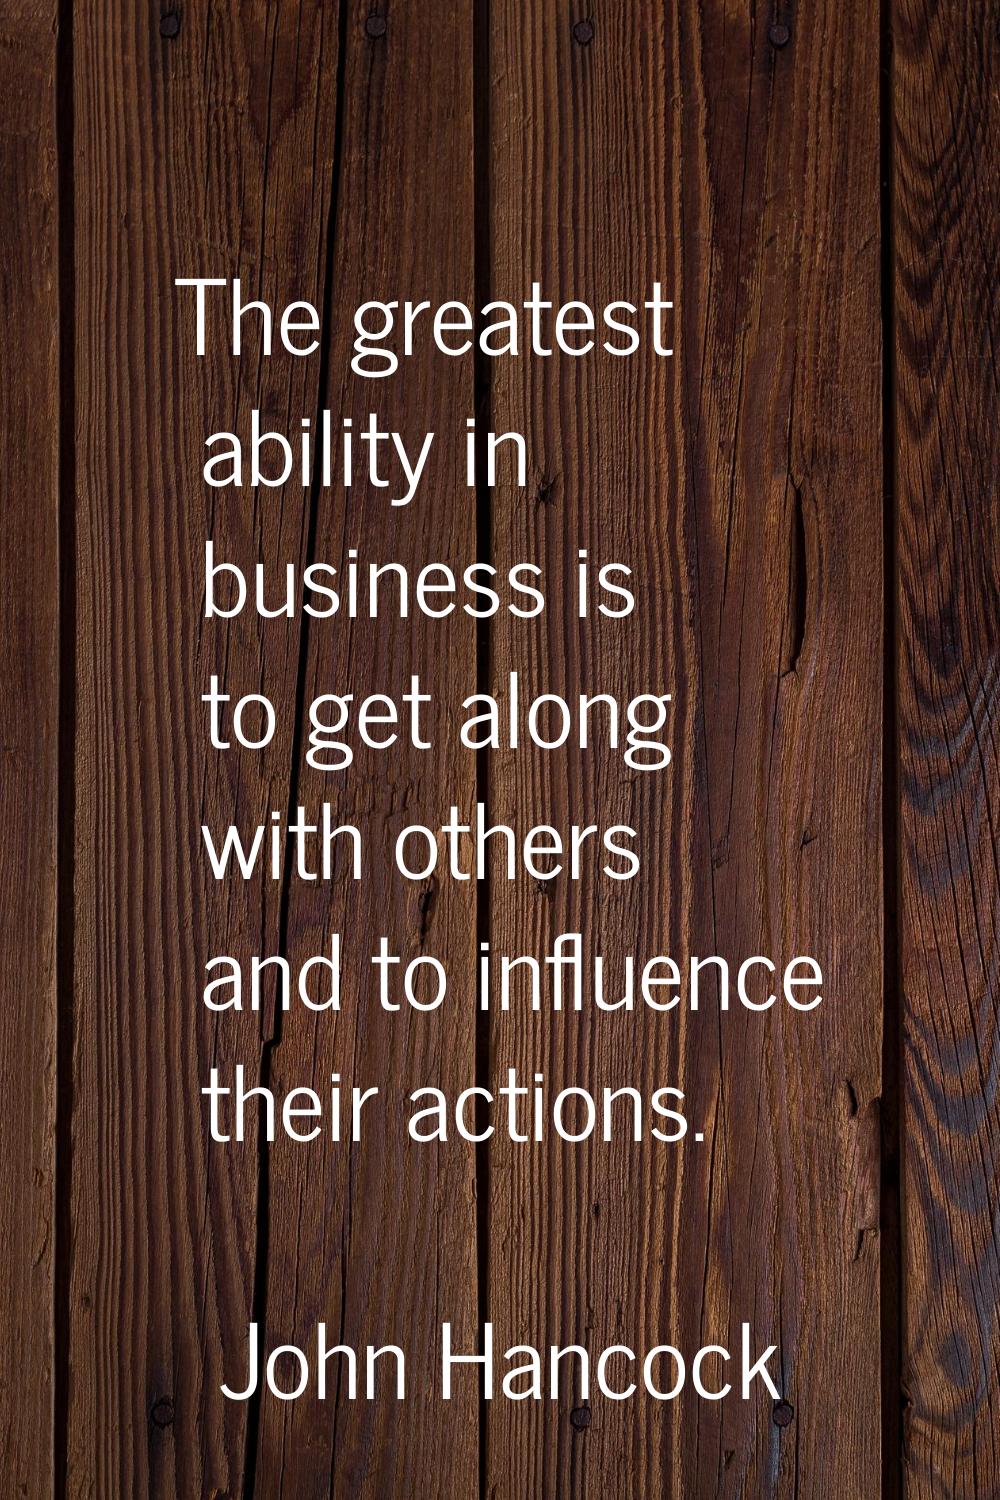 The greatest ability in business is to get along with others and to influence their actions.